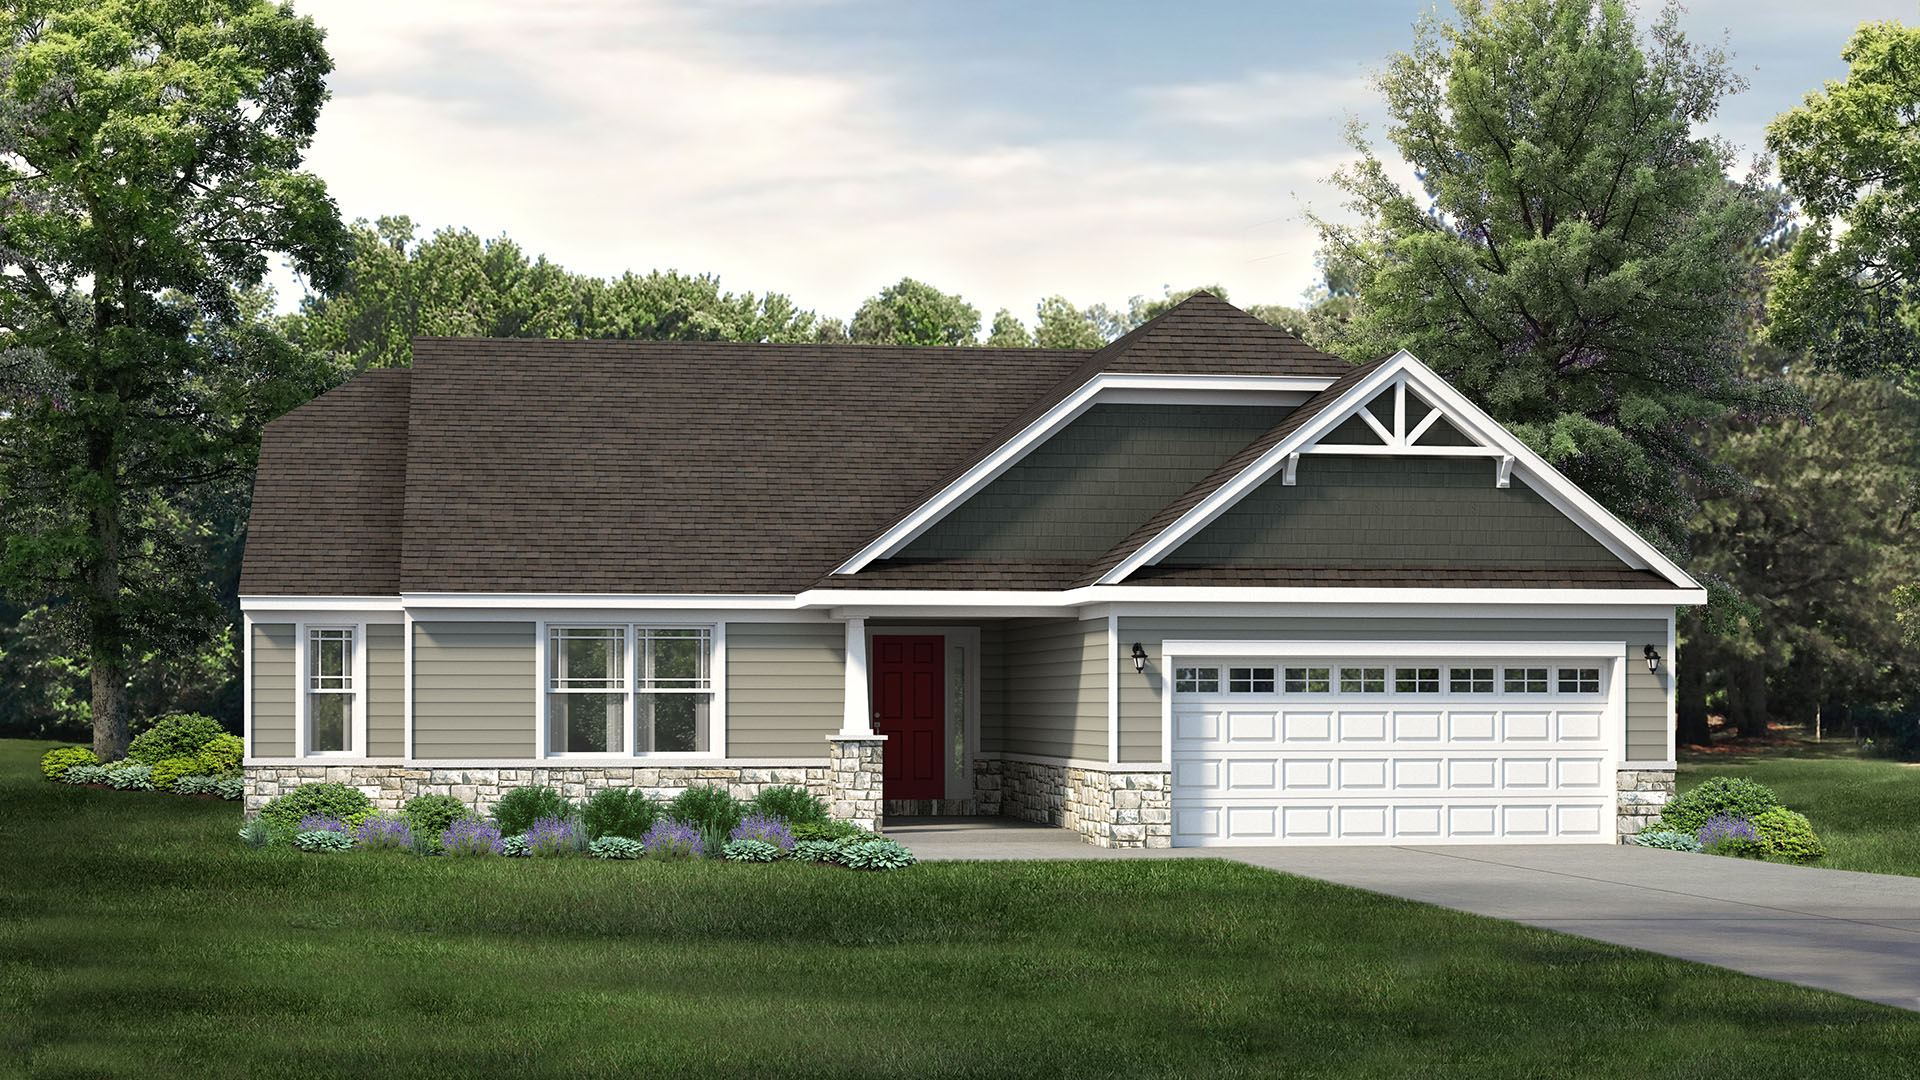 New Phase Now Selling at Deerhaven in Bellefonte